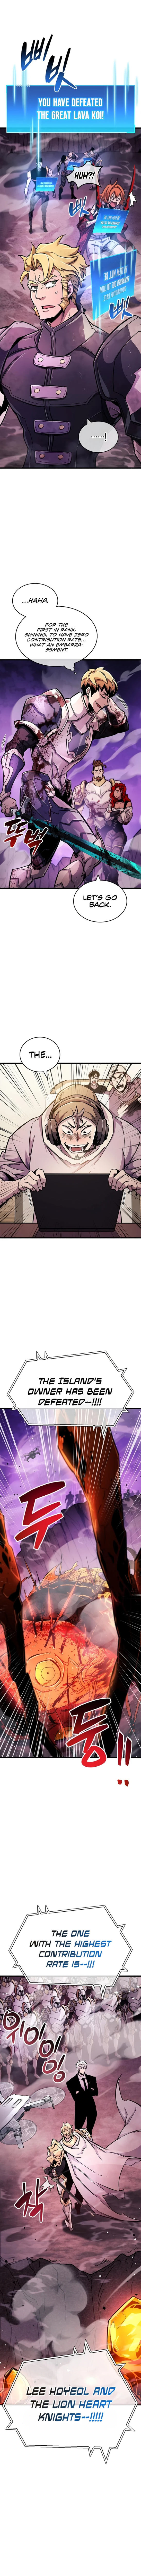 The Player Hides His Past - Chapter 24 Page 6